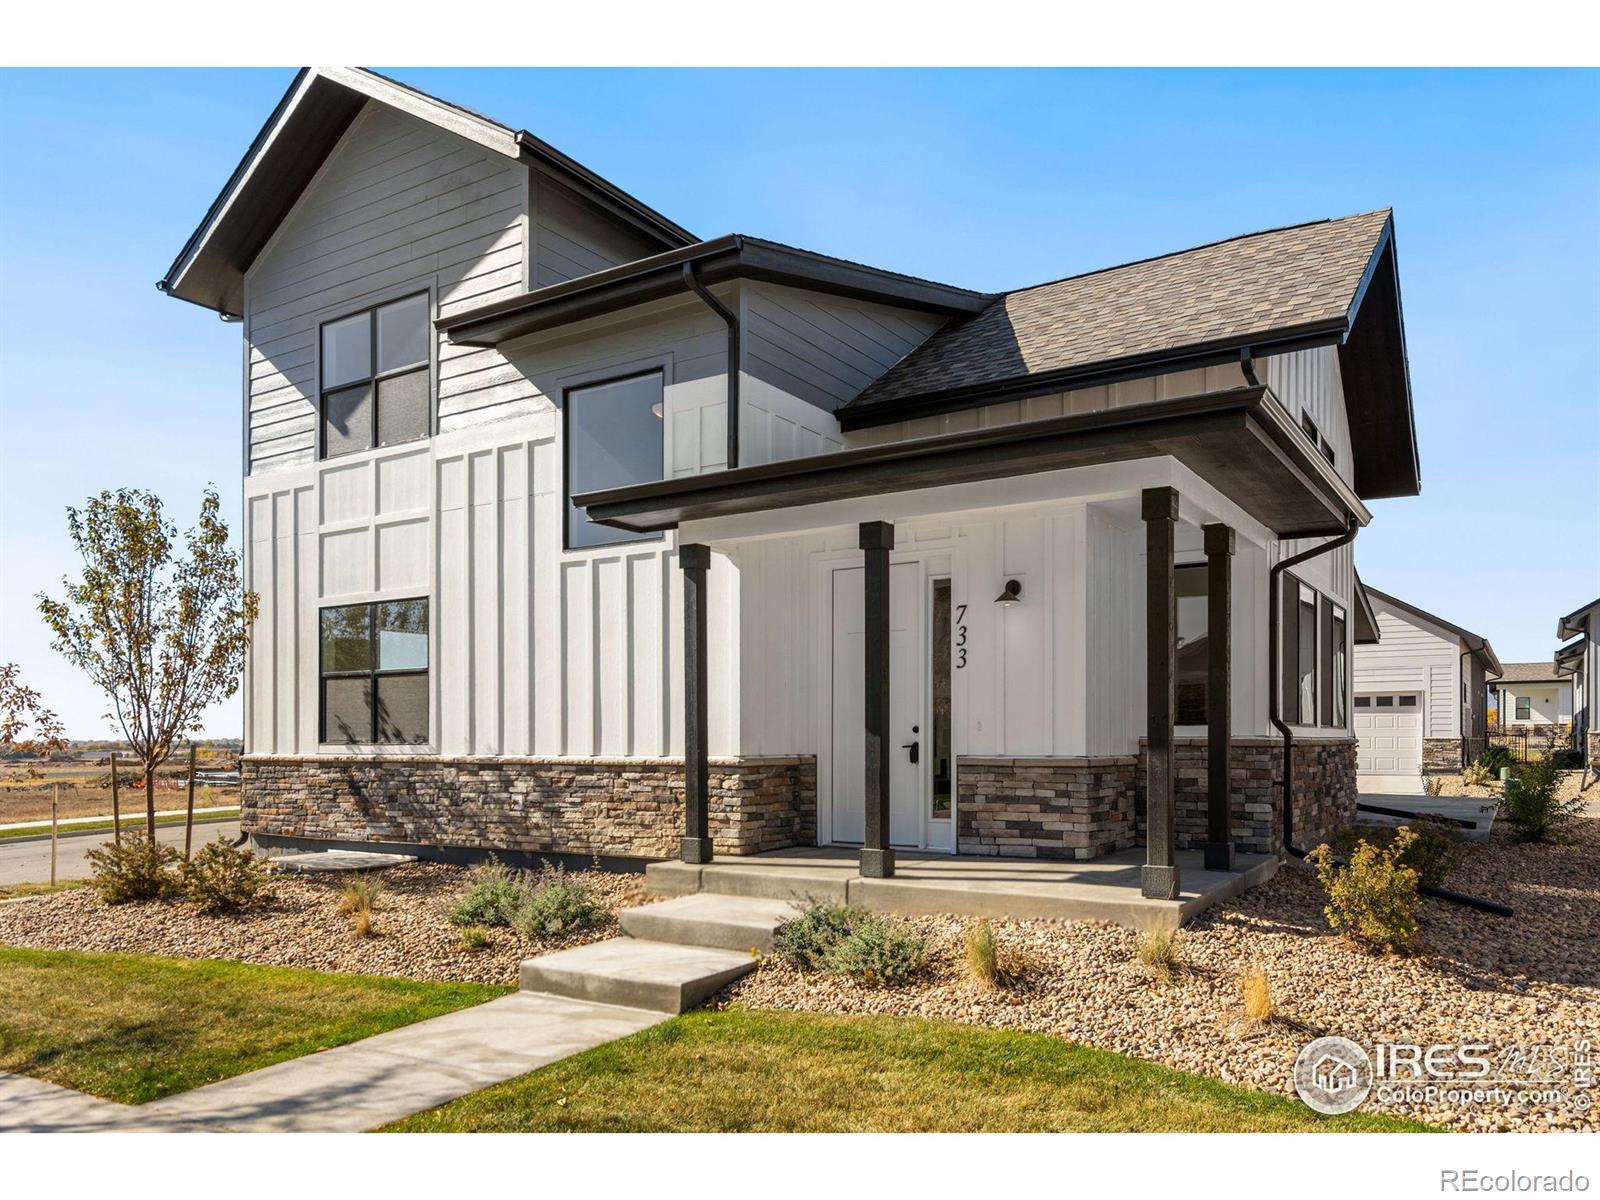 733  Campfire Drive, fort collins MLS: 4567891004699 Beds: 3 Baths: 3 Price: $674,900